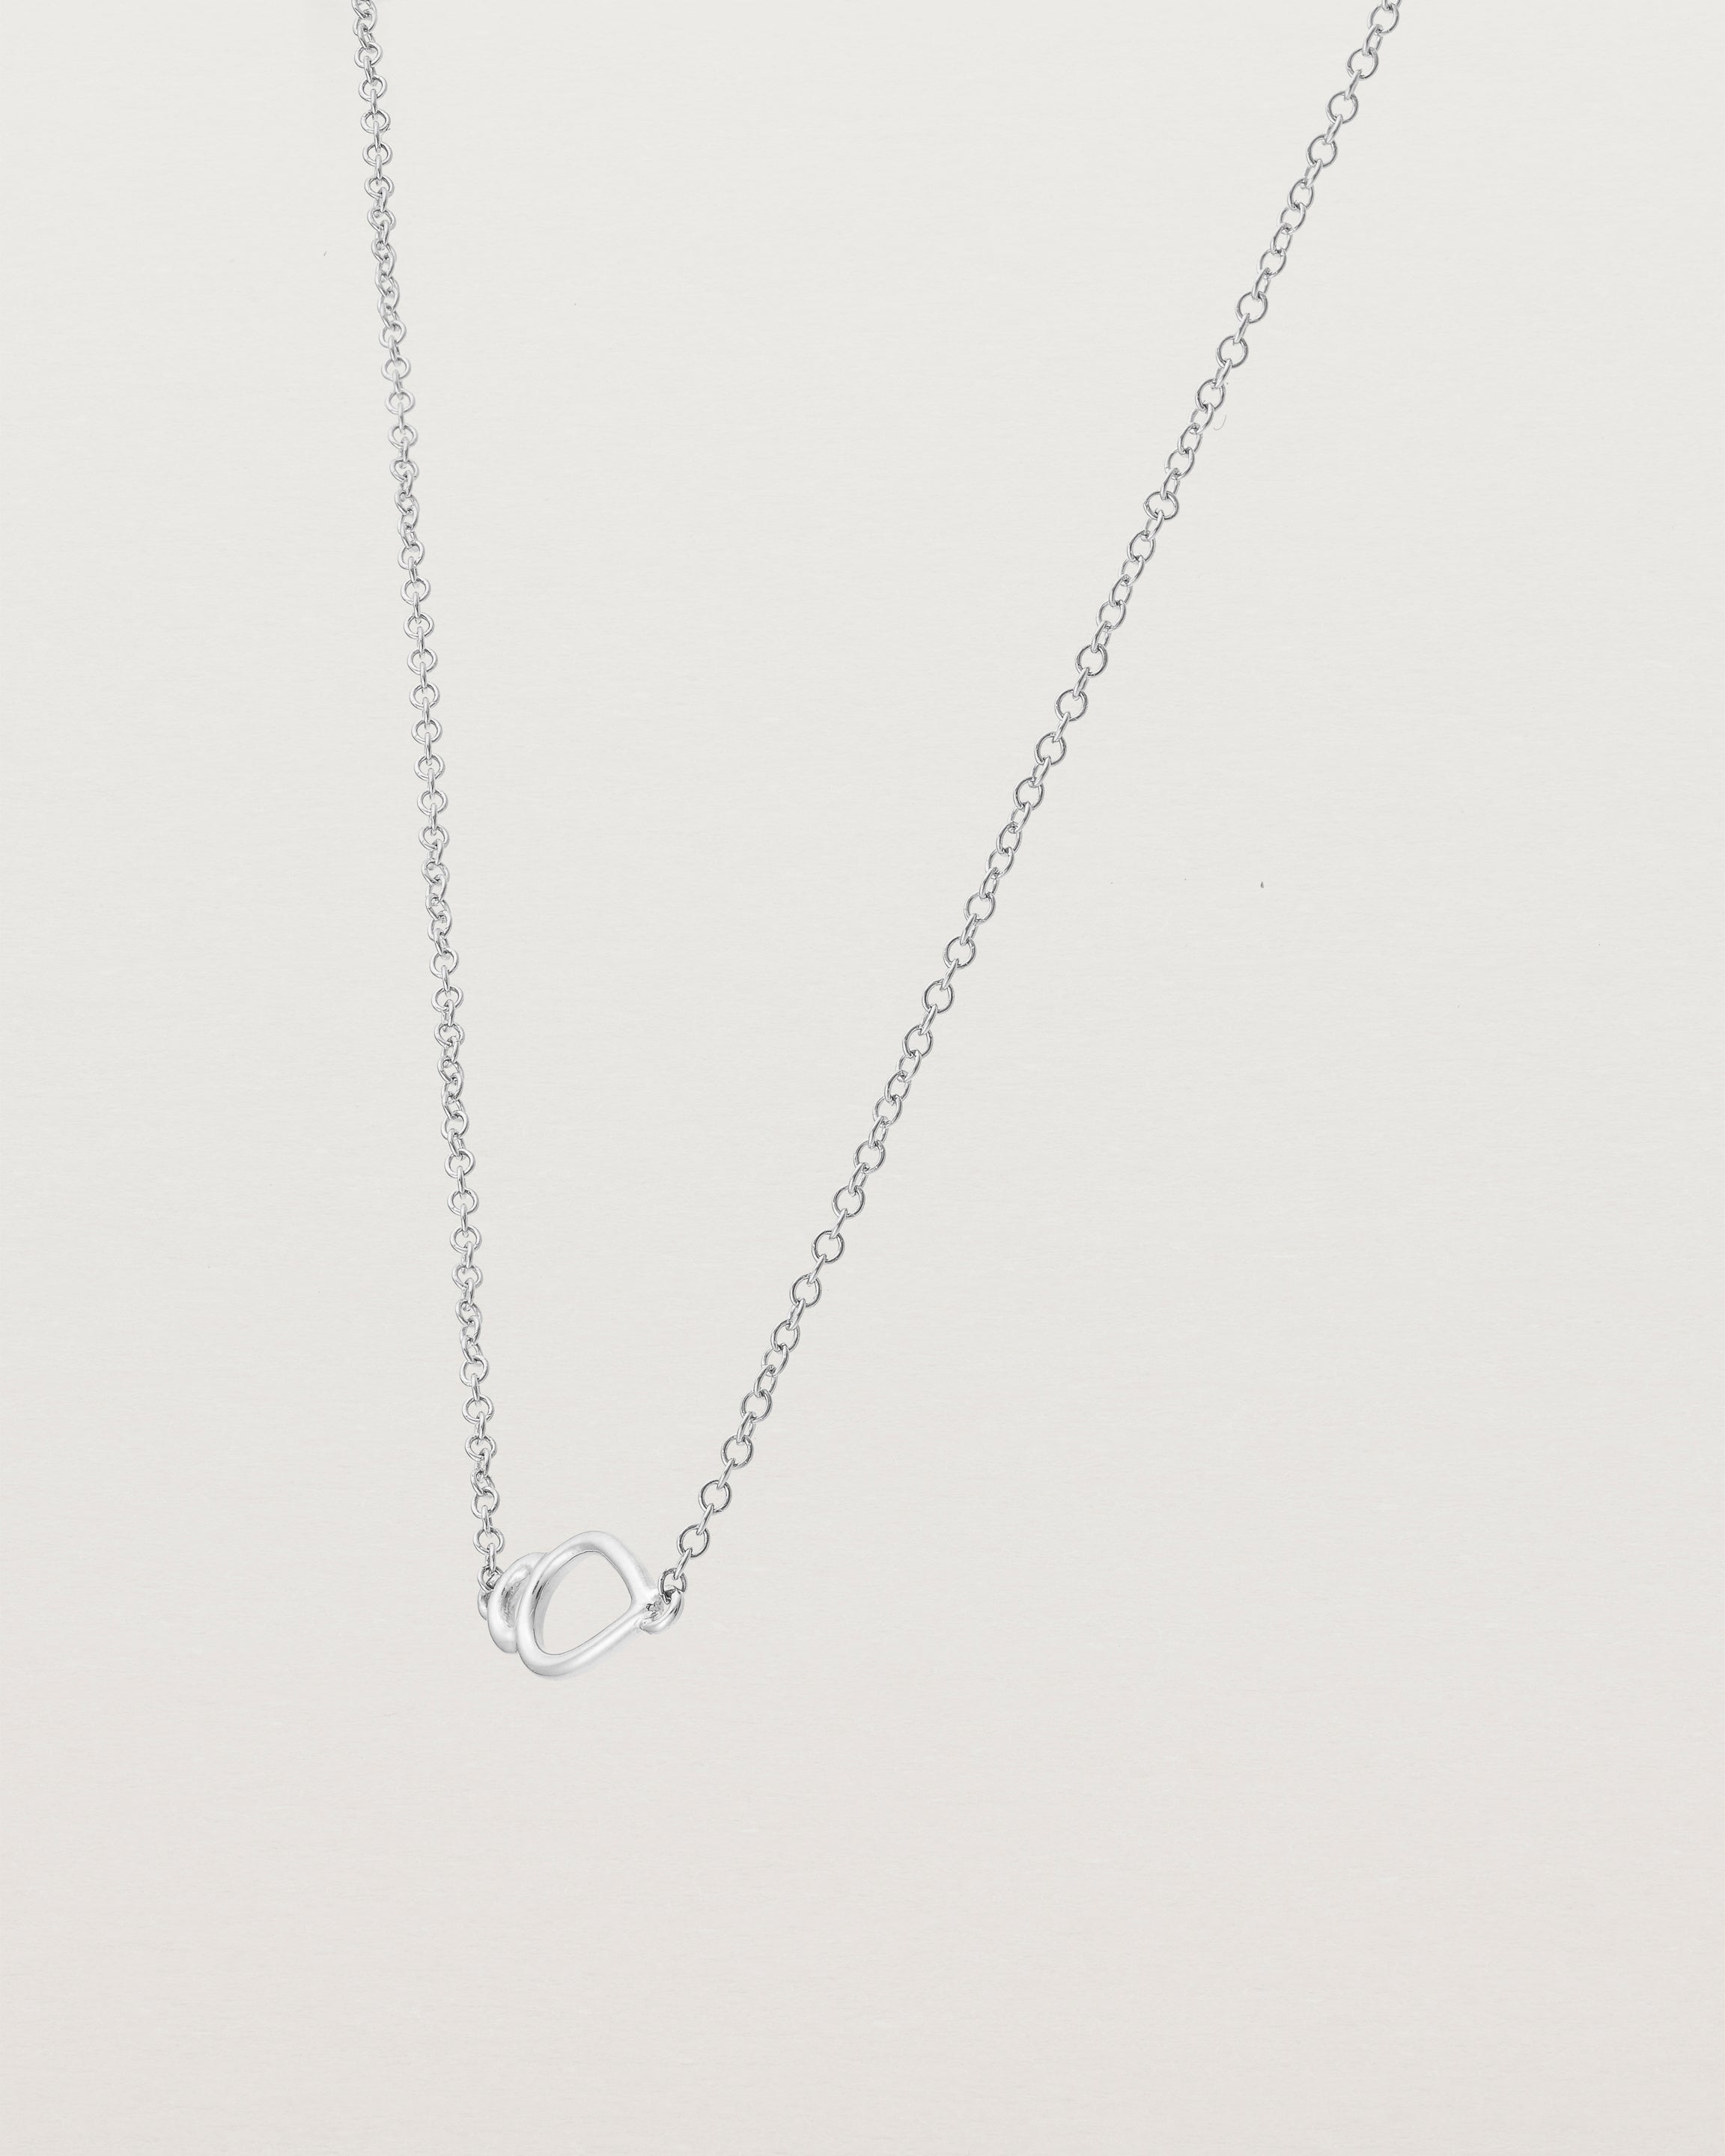 Angled view of the Oana Necklace in Sterling Silver.